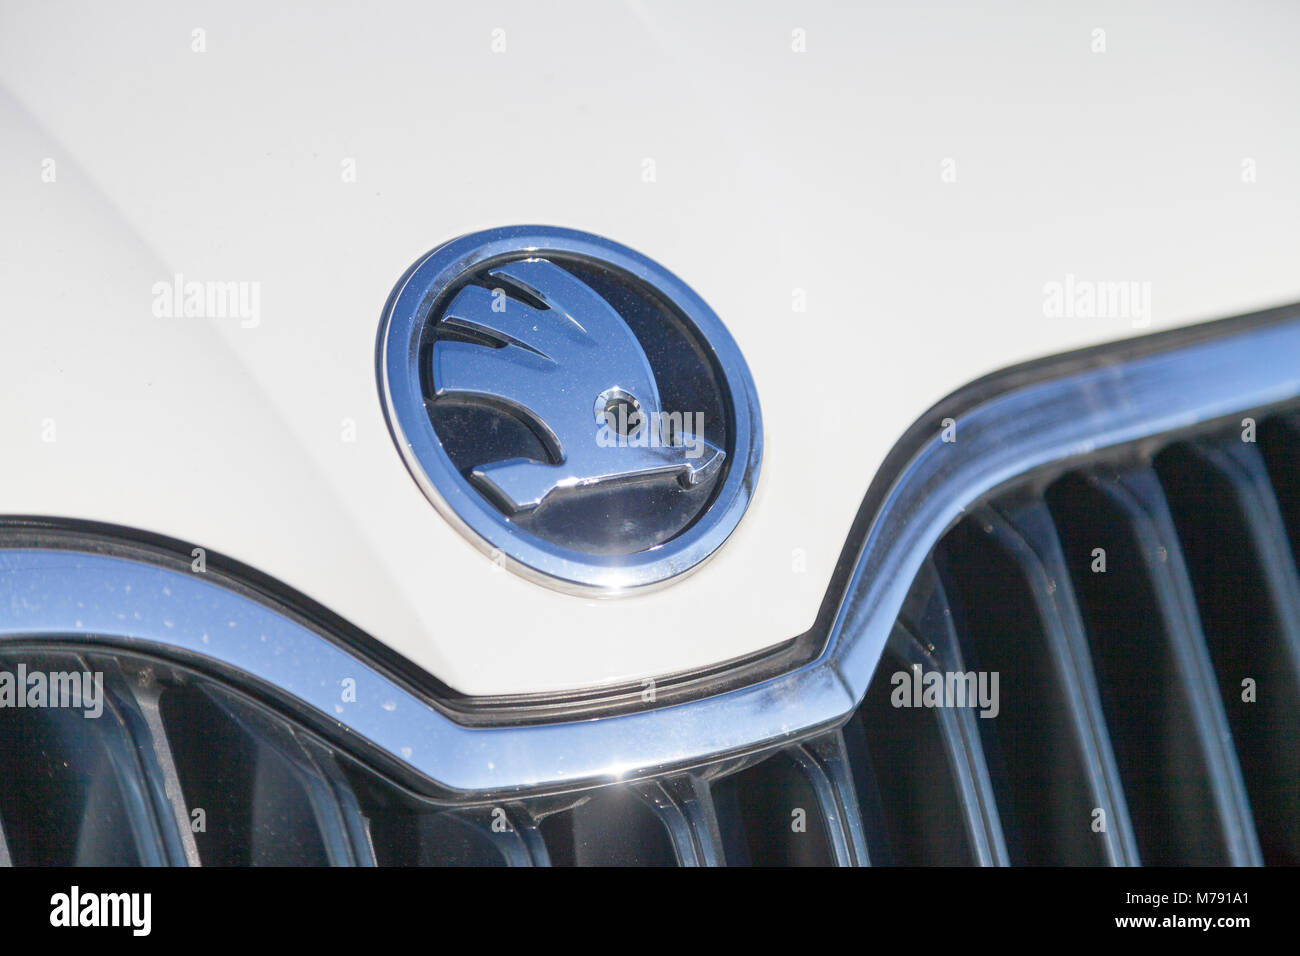 NUERNBERG / GERMANY - MARCH 4, 2018: Skoda logo on a Skoda car at a car dealer in Germany. Skoda is a Czech automobile manufacturer founded in 1895 as Stock Photo